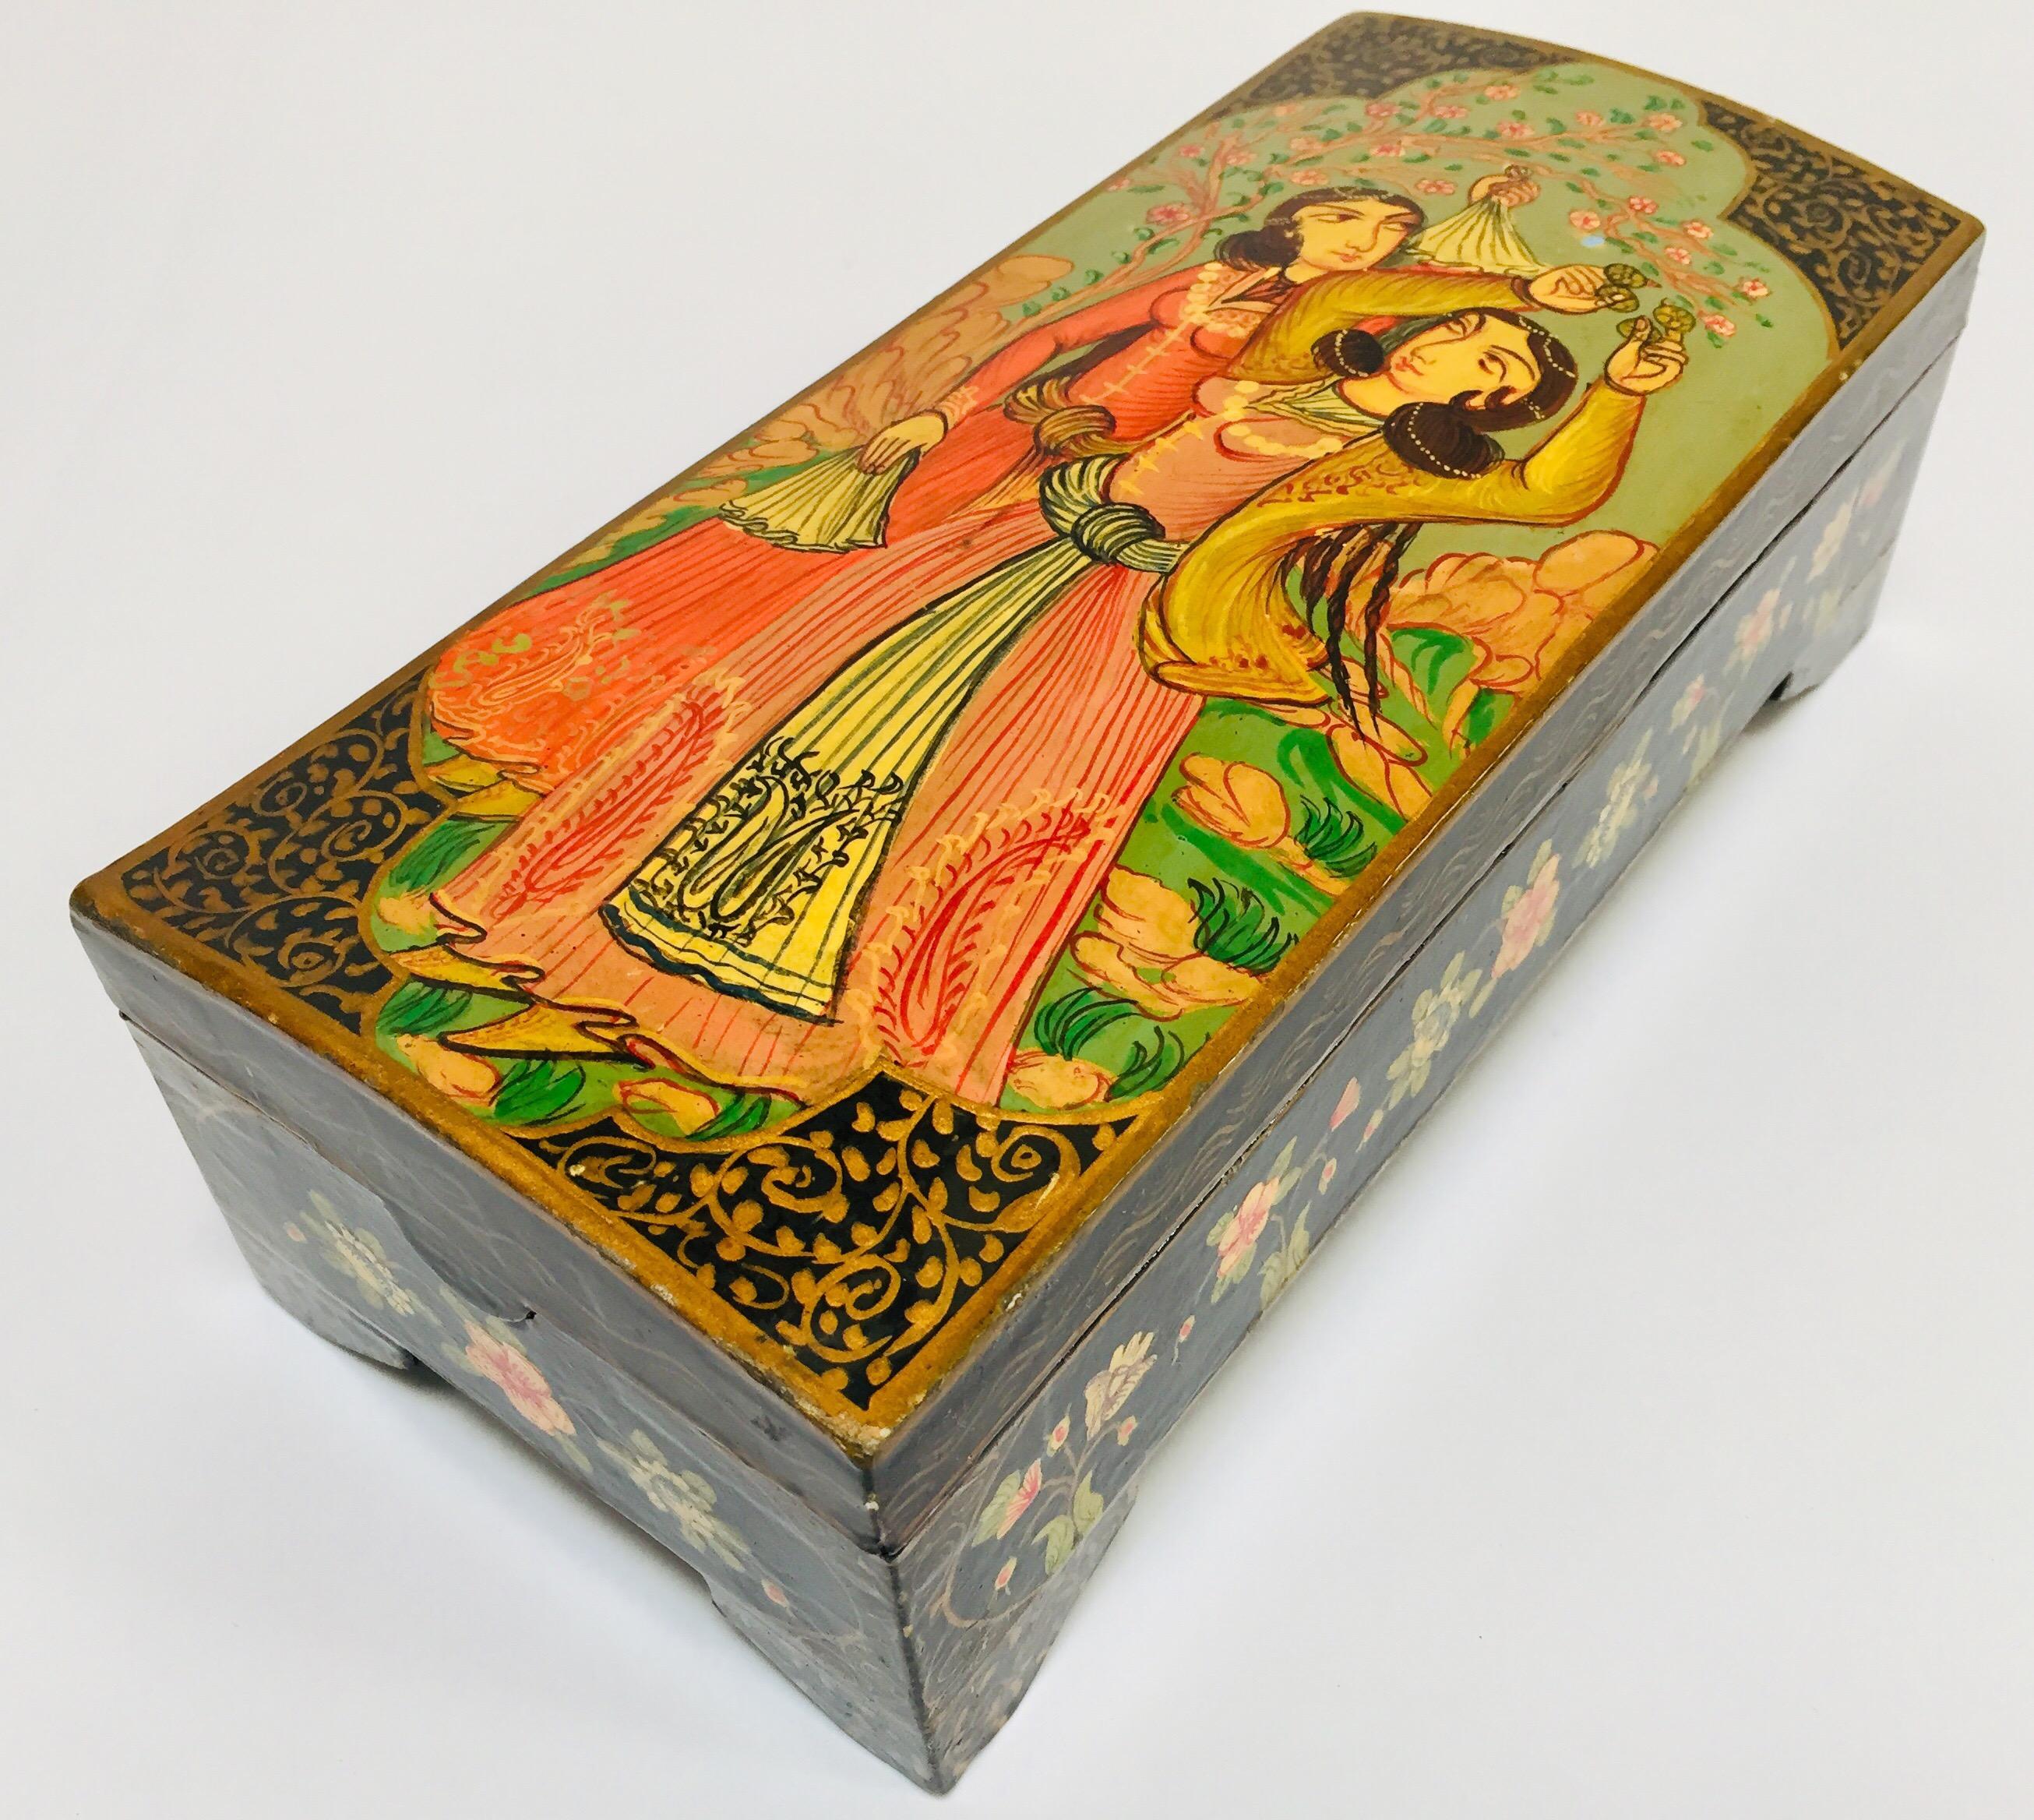 Lacquer Pen Box Hand Painted with Harem Girls Playing and Dancing 8